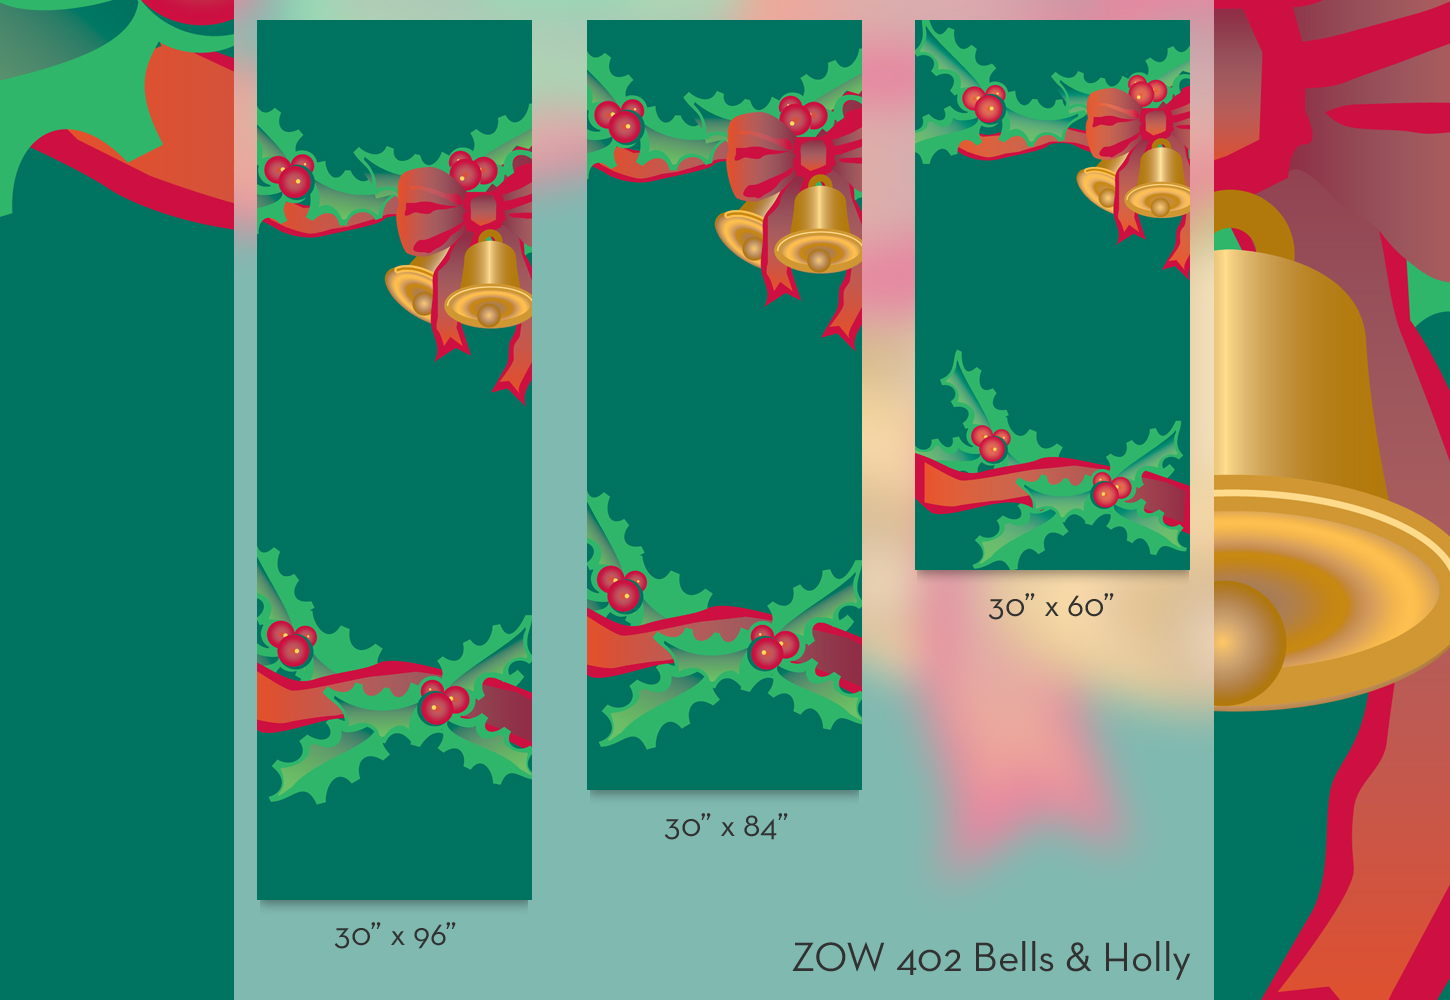 ZOW 402 Bells & Holly